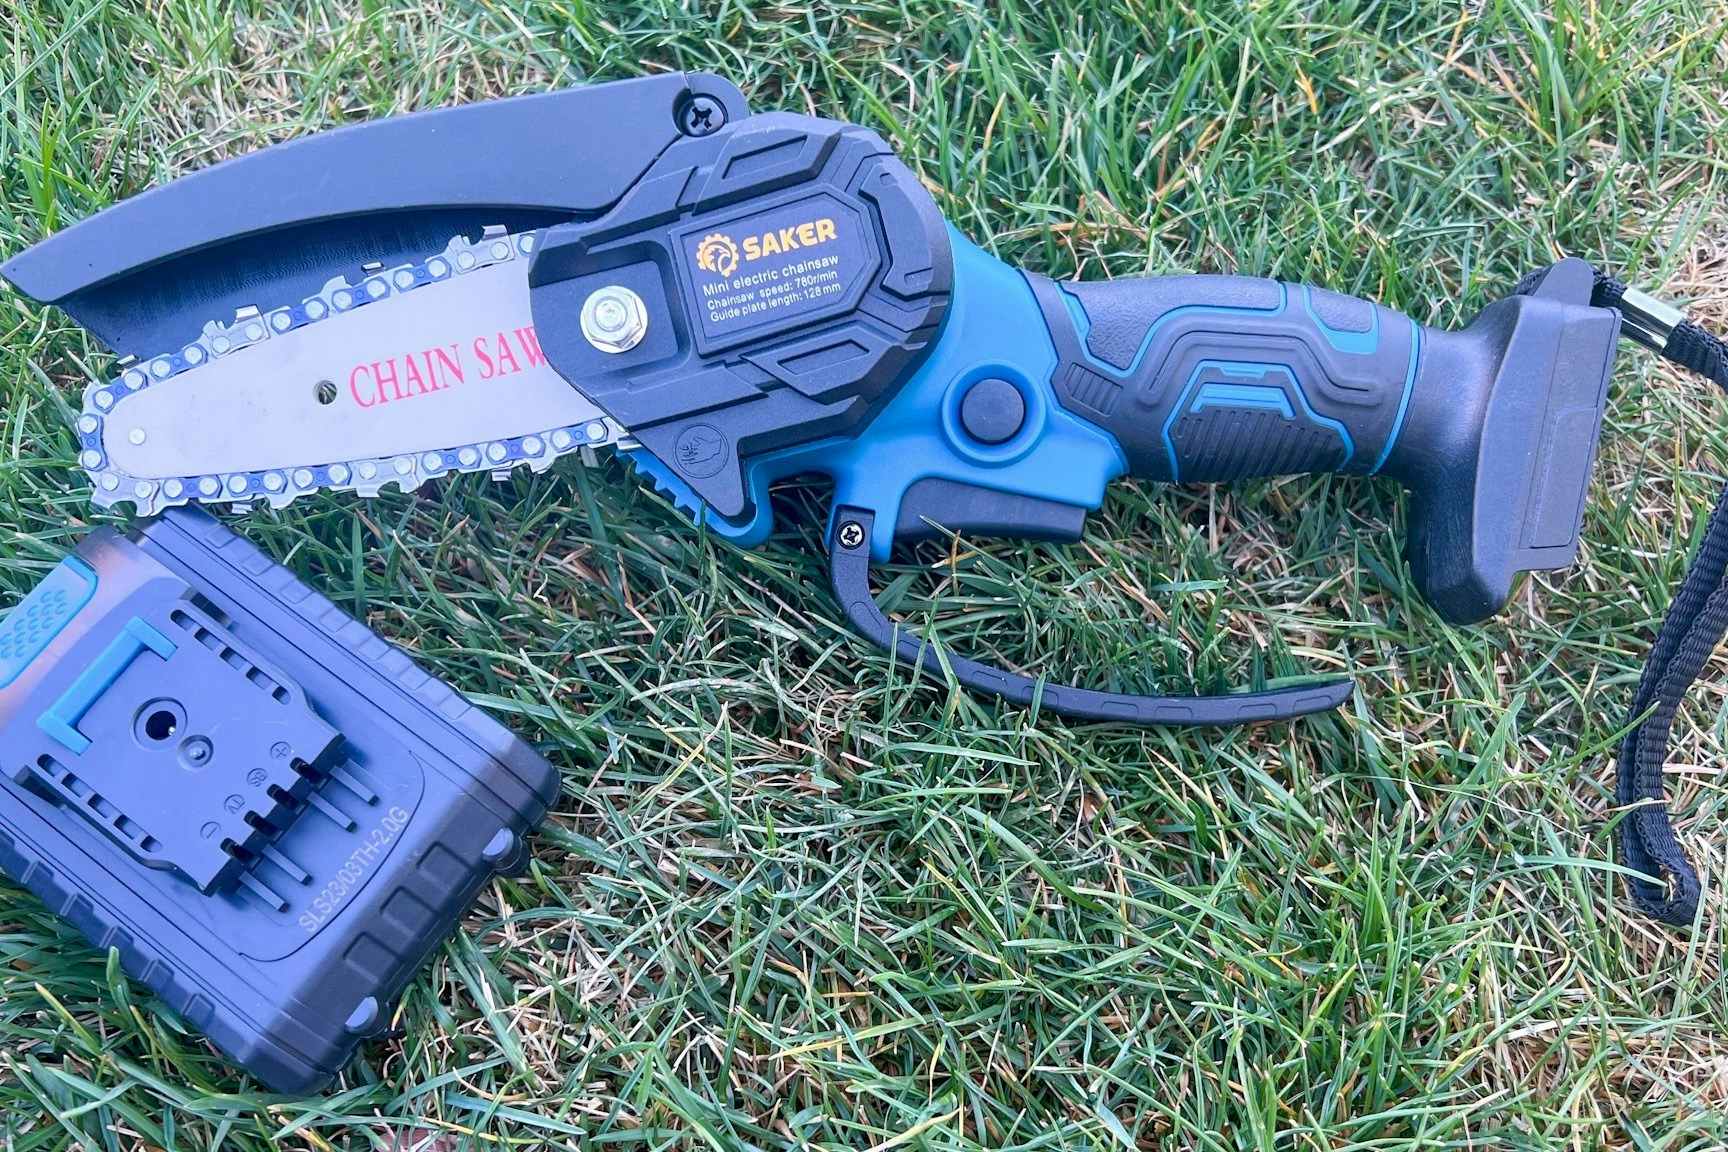 This Mini Electric Chainsaw Dropped to $39.98 on Amazon